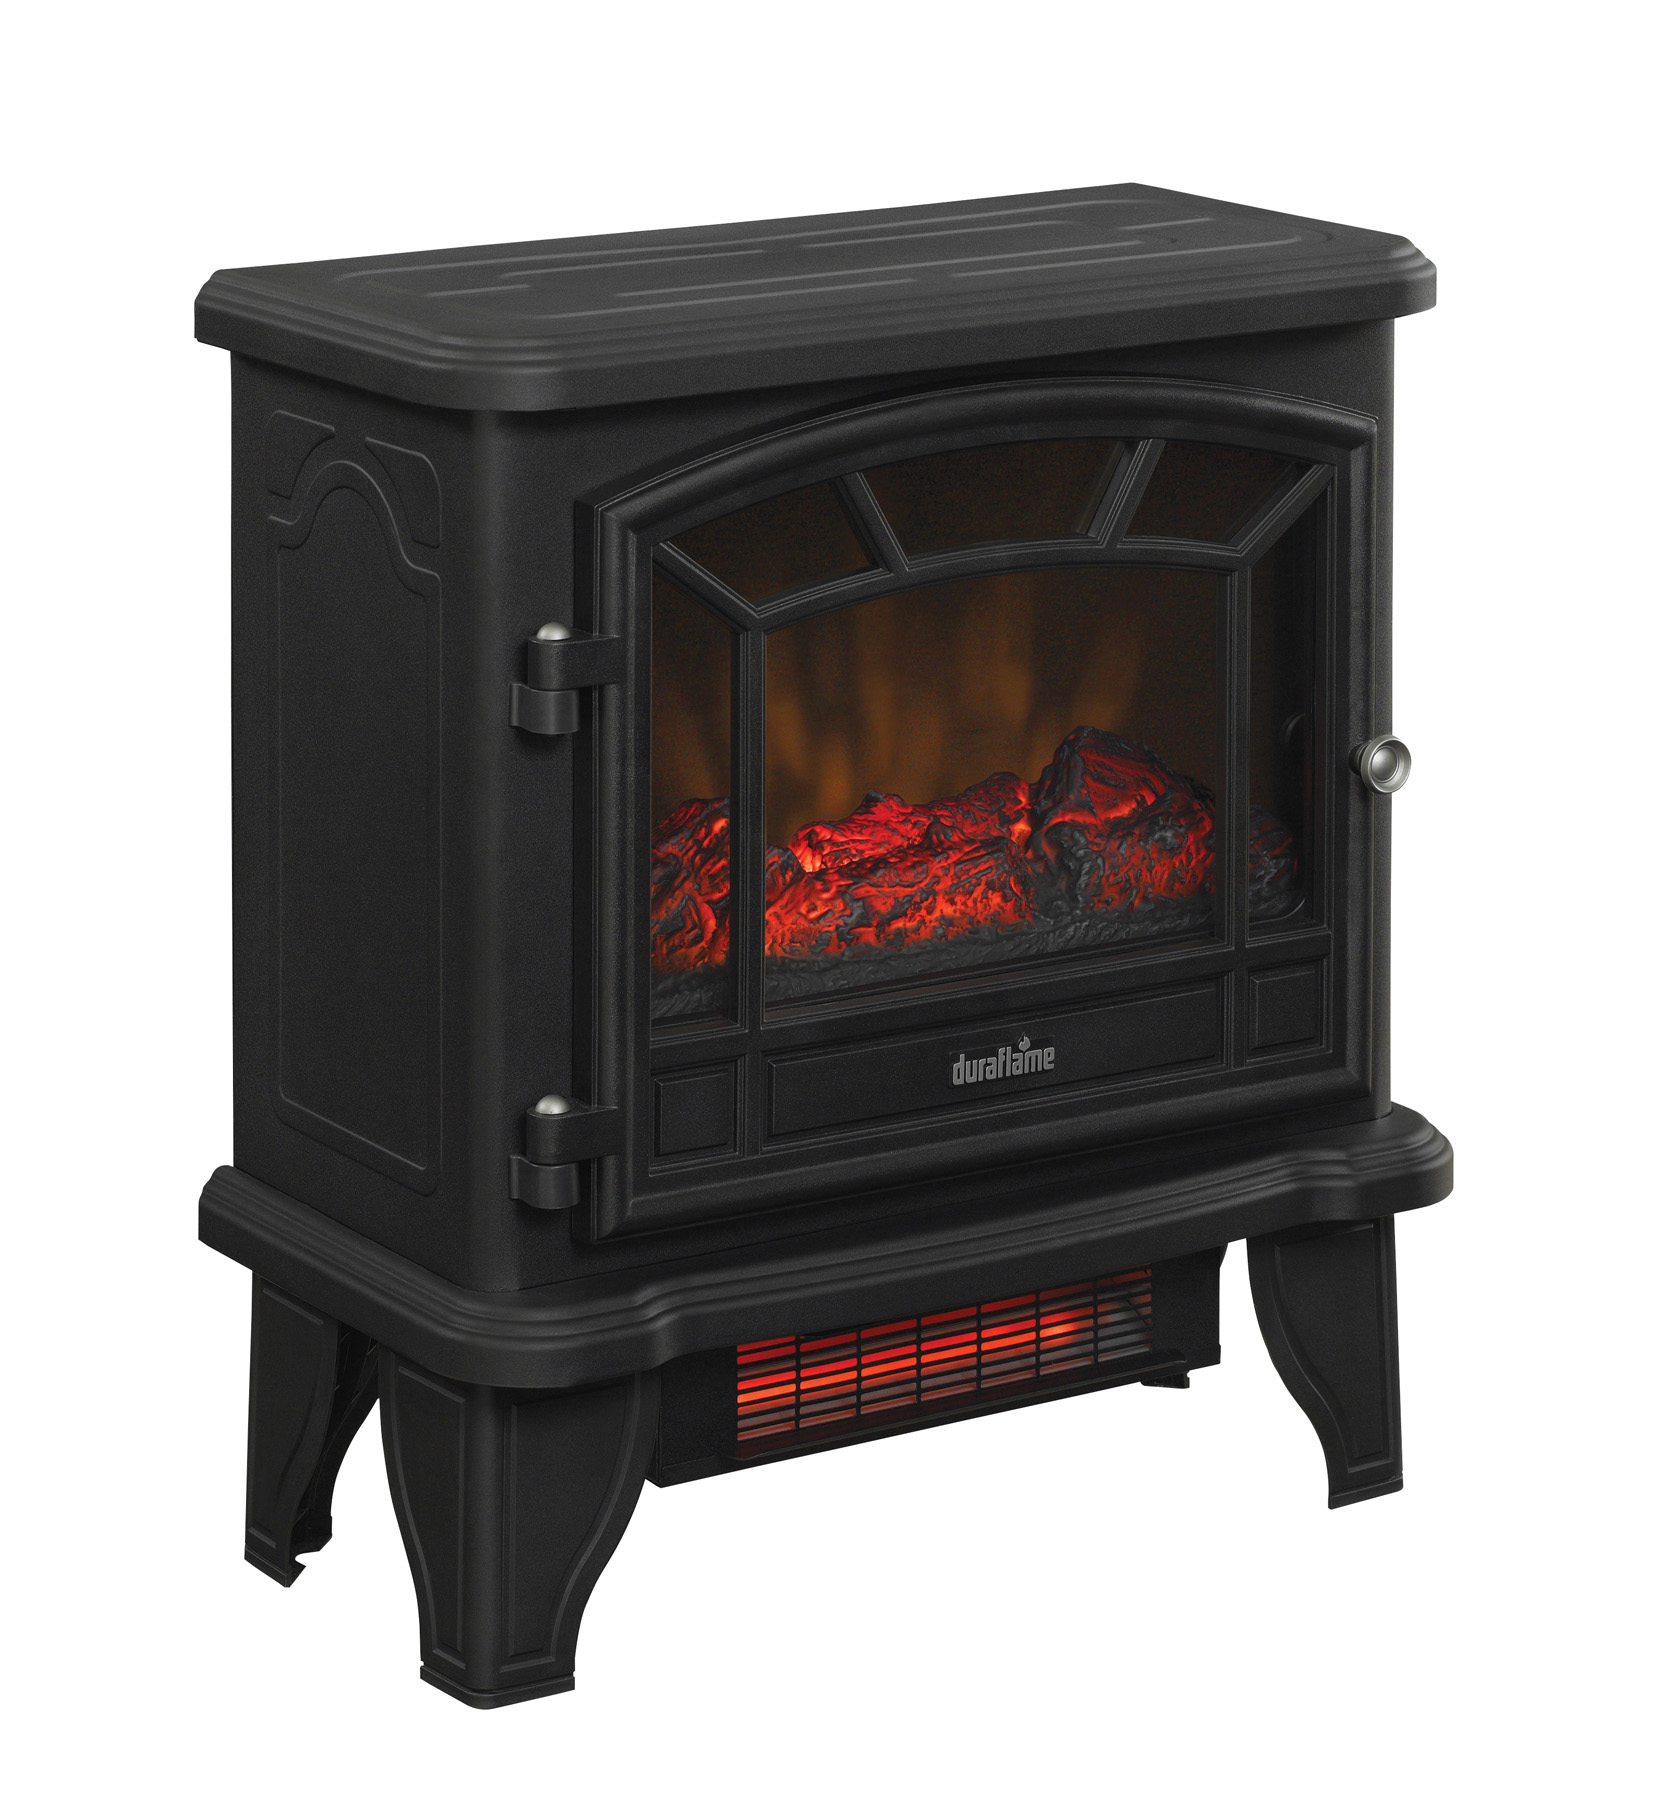 Duraflame 1,000 sq ft Infrared Quartz Electric Fireplace Stove Heater - image 3 of 5